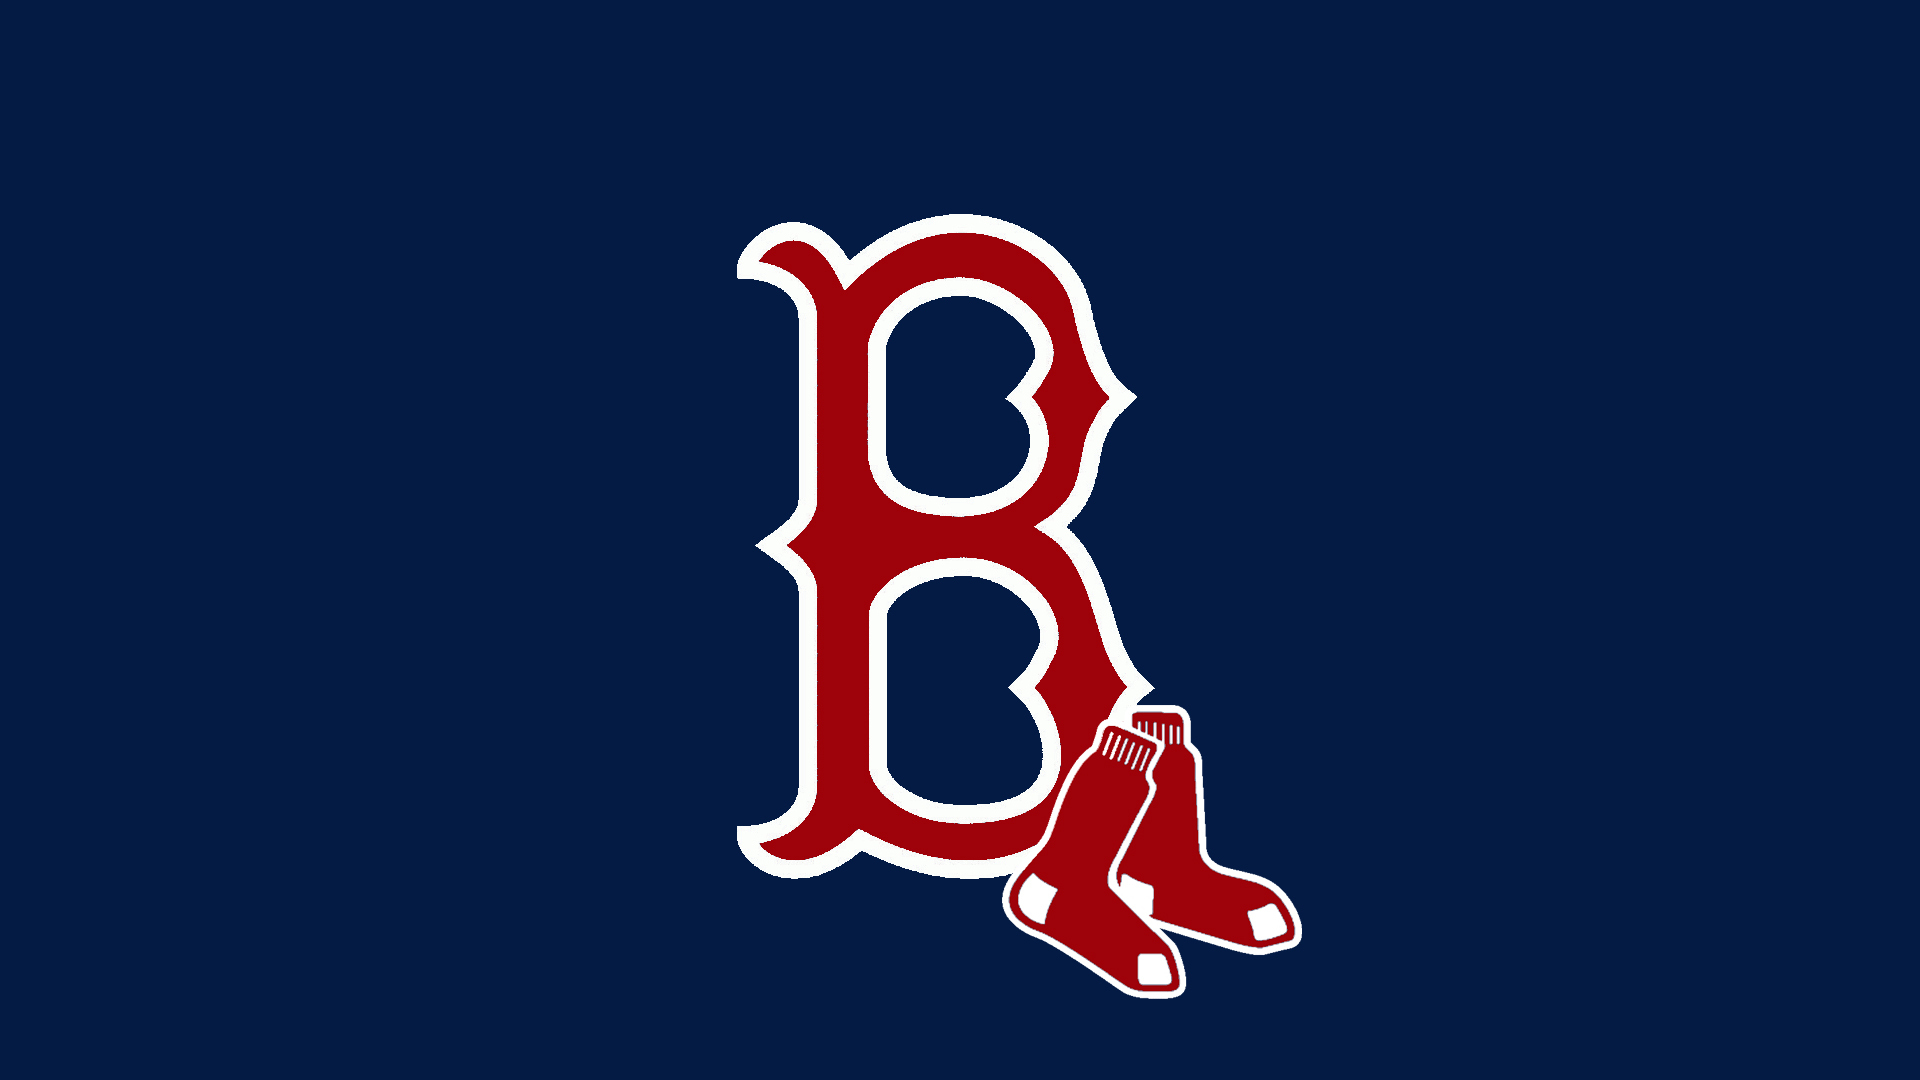 Red Sox Wallpapers